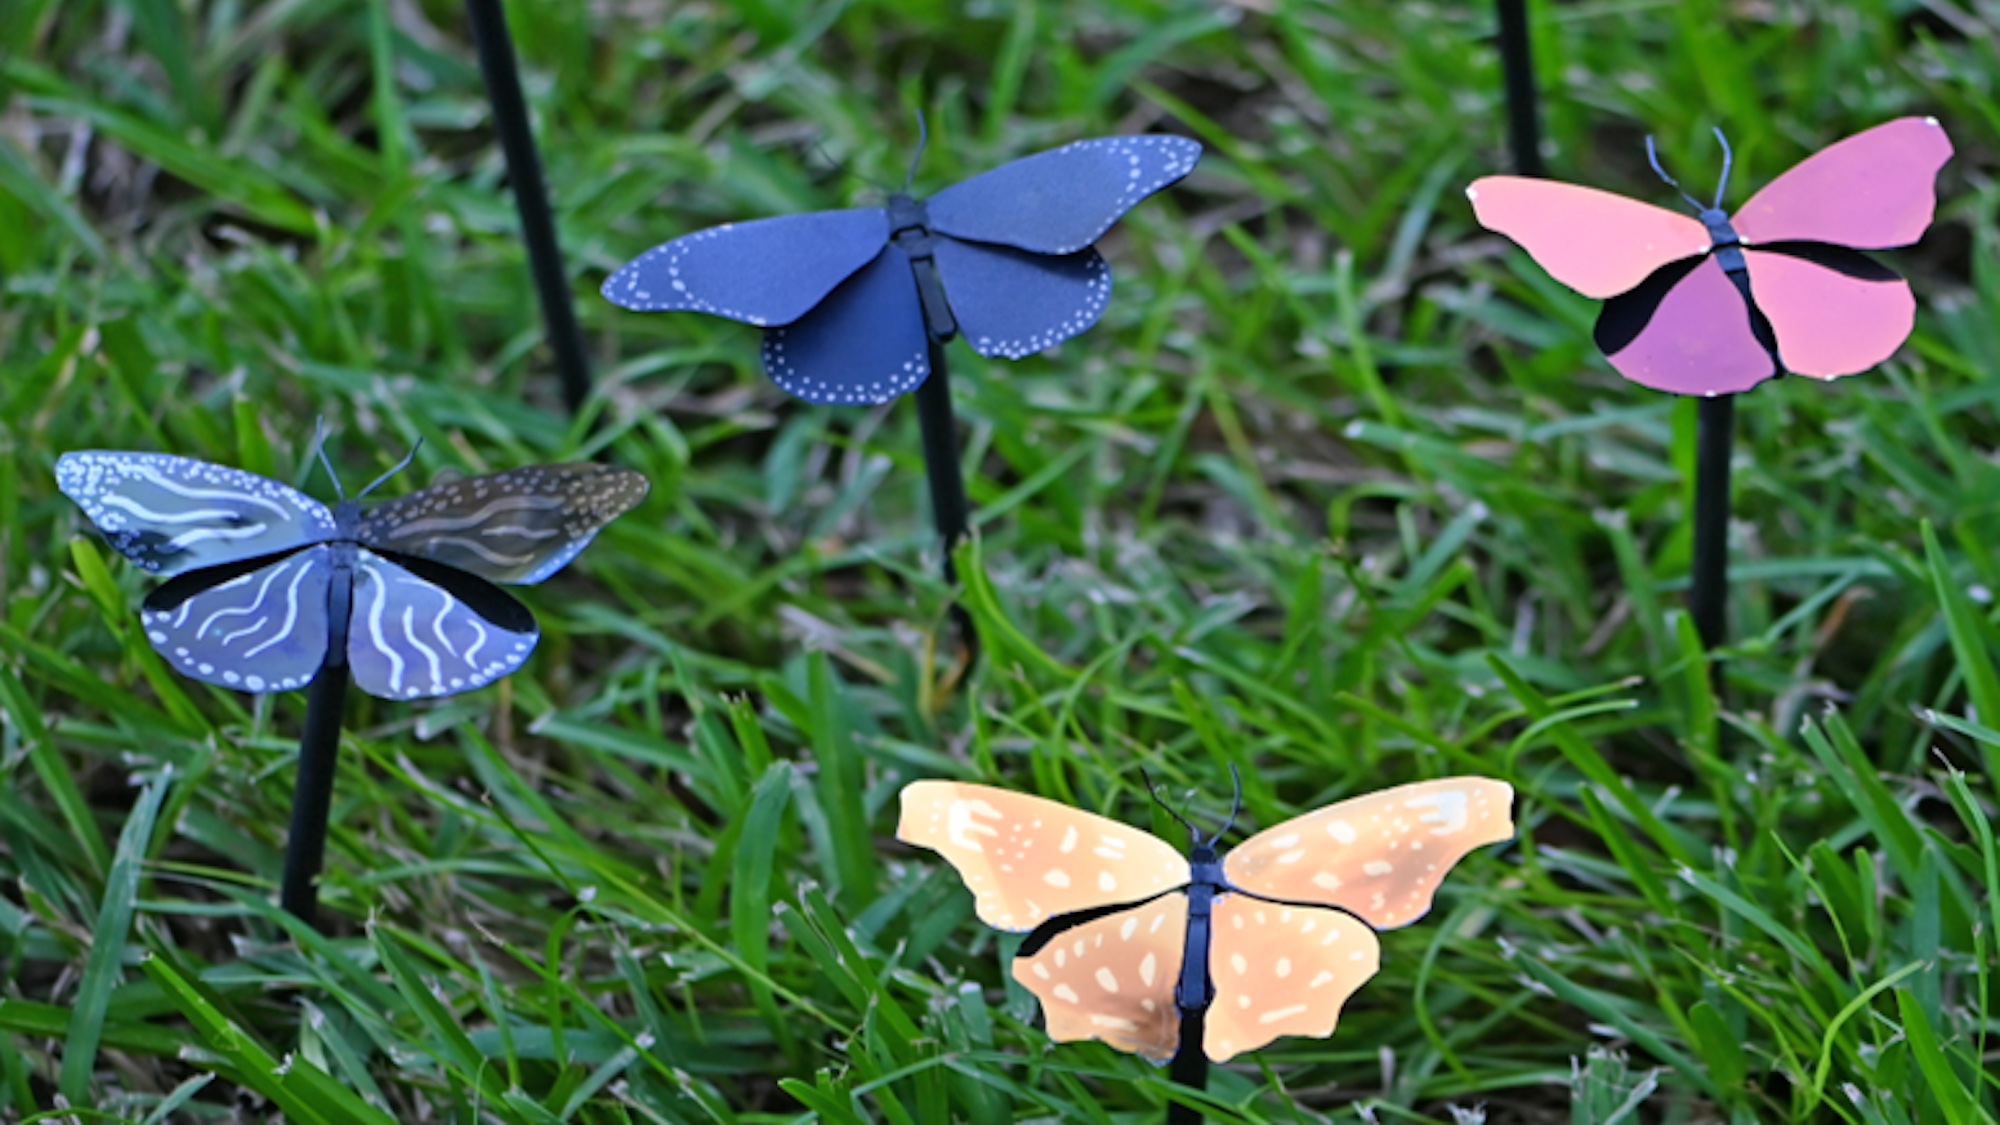 Butterfly cutouts painted with plasmonic paint hues against grass background